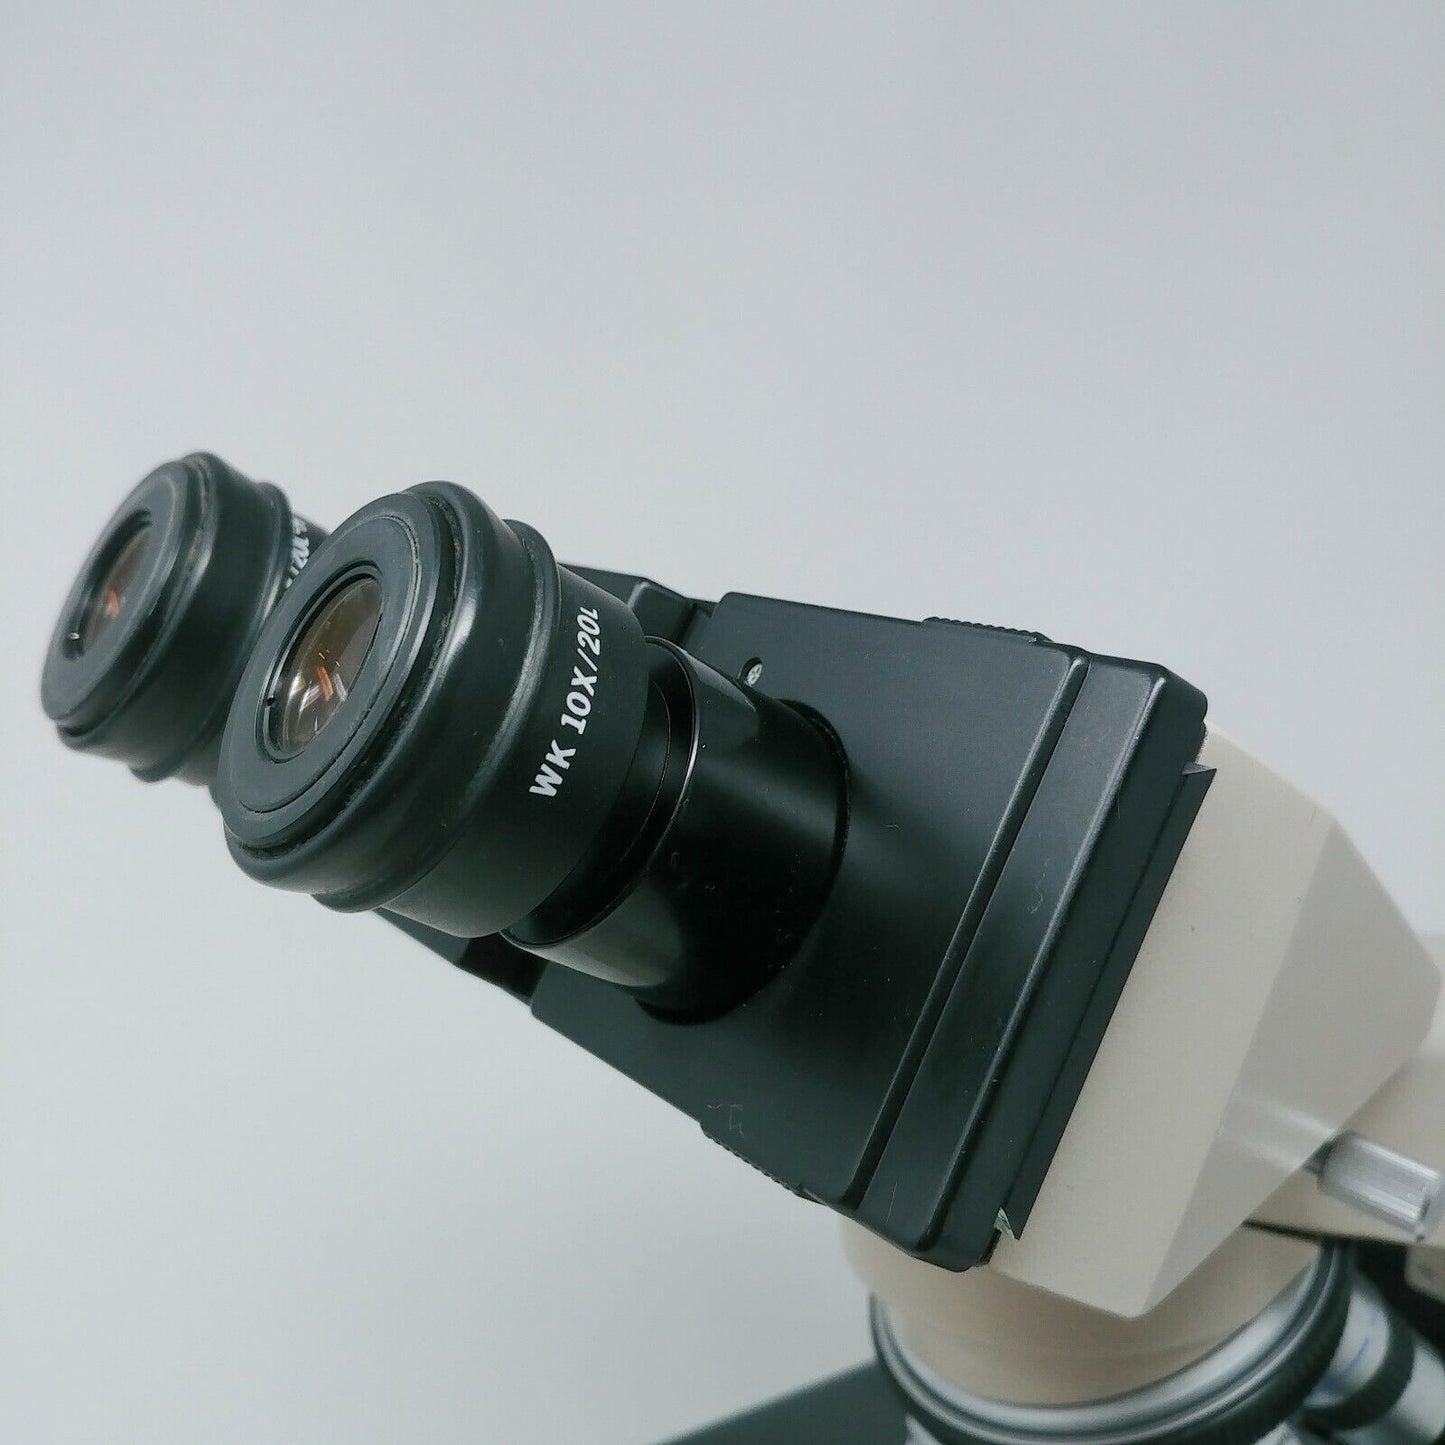 Olympus Microscope BH-2 BH2 with SPlan Objectives and 2x for Pathology - microscopemarketplace